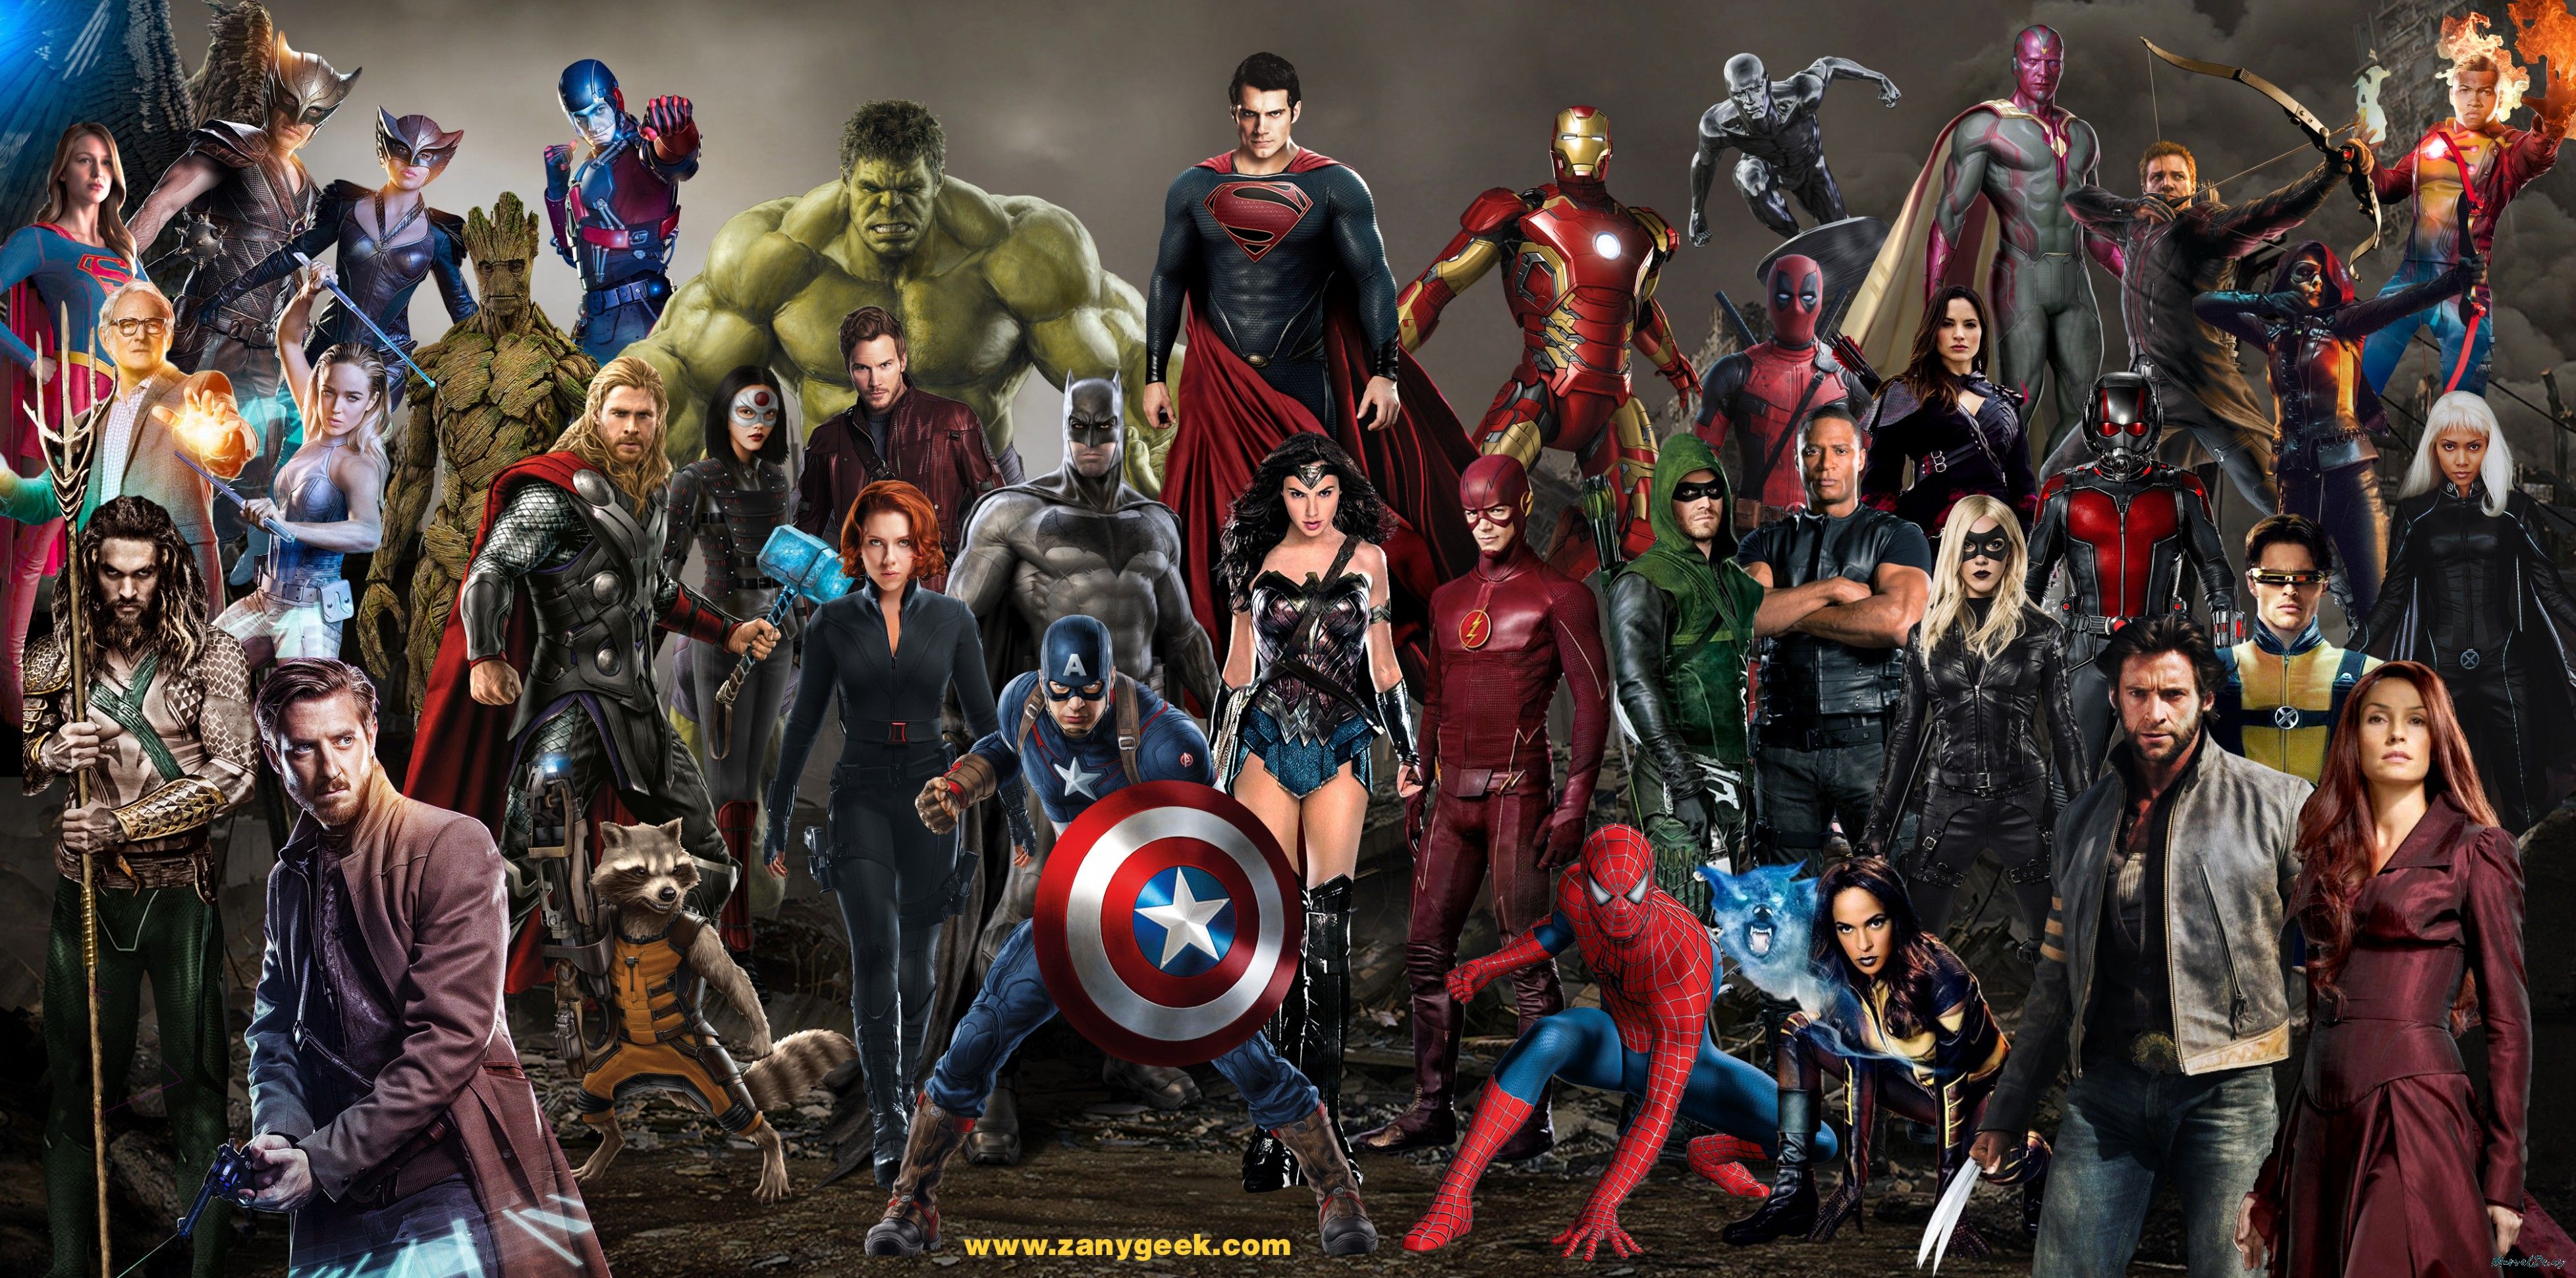 63 Marvel and DC